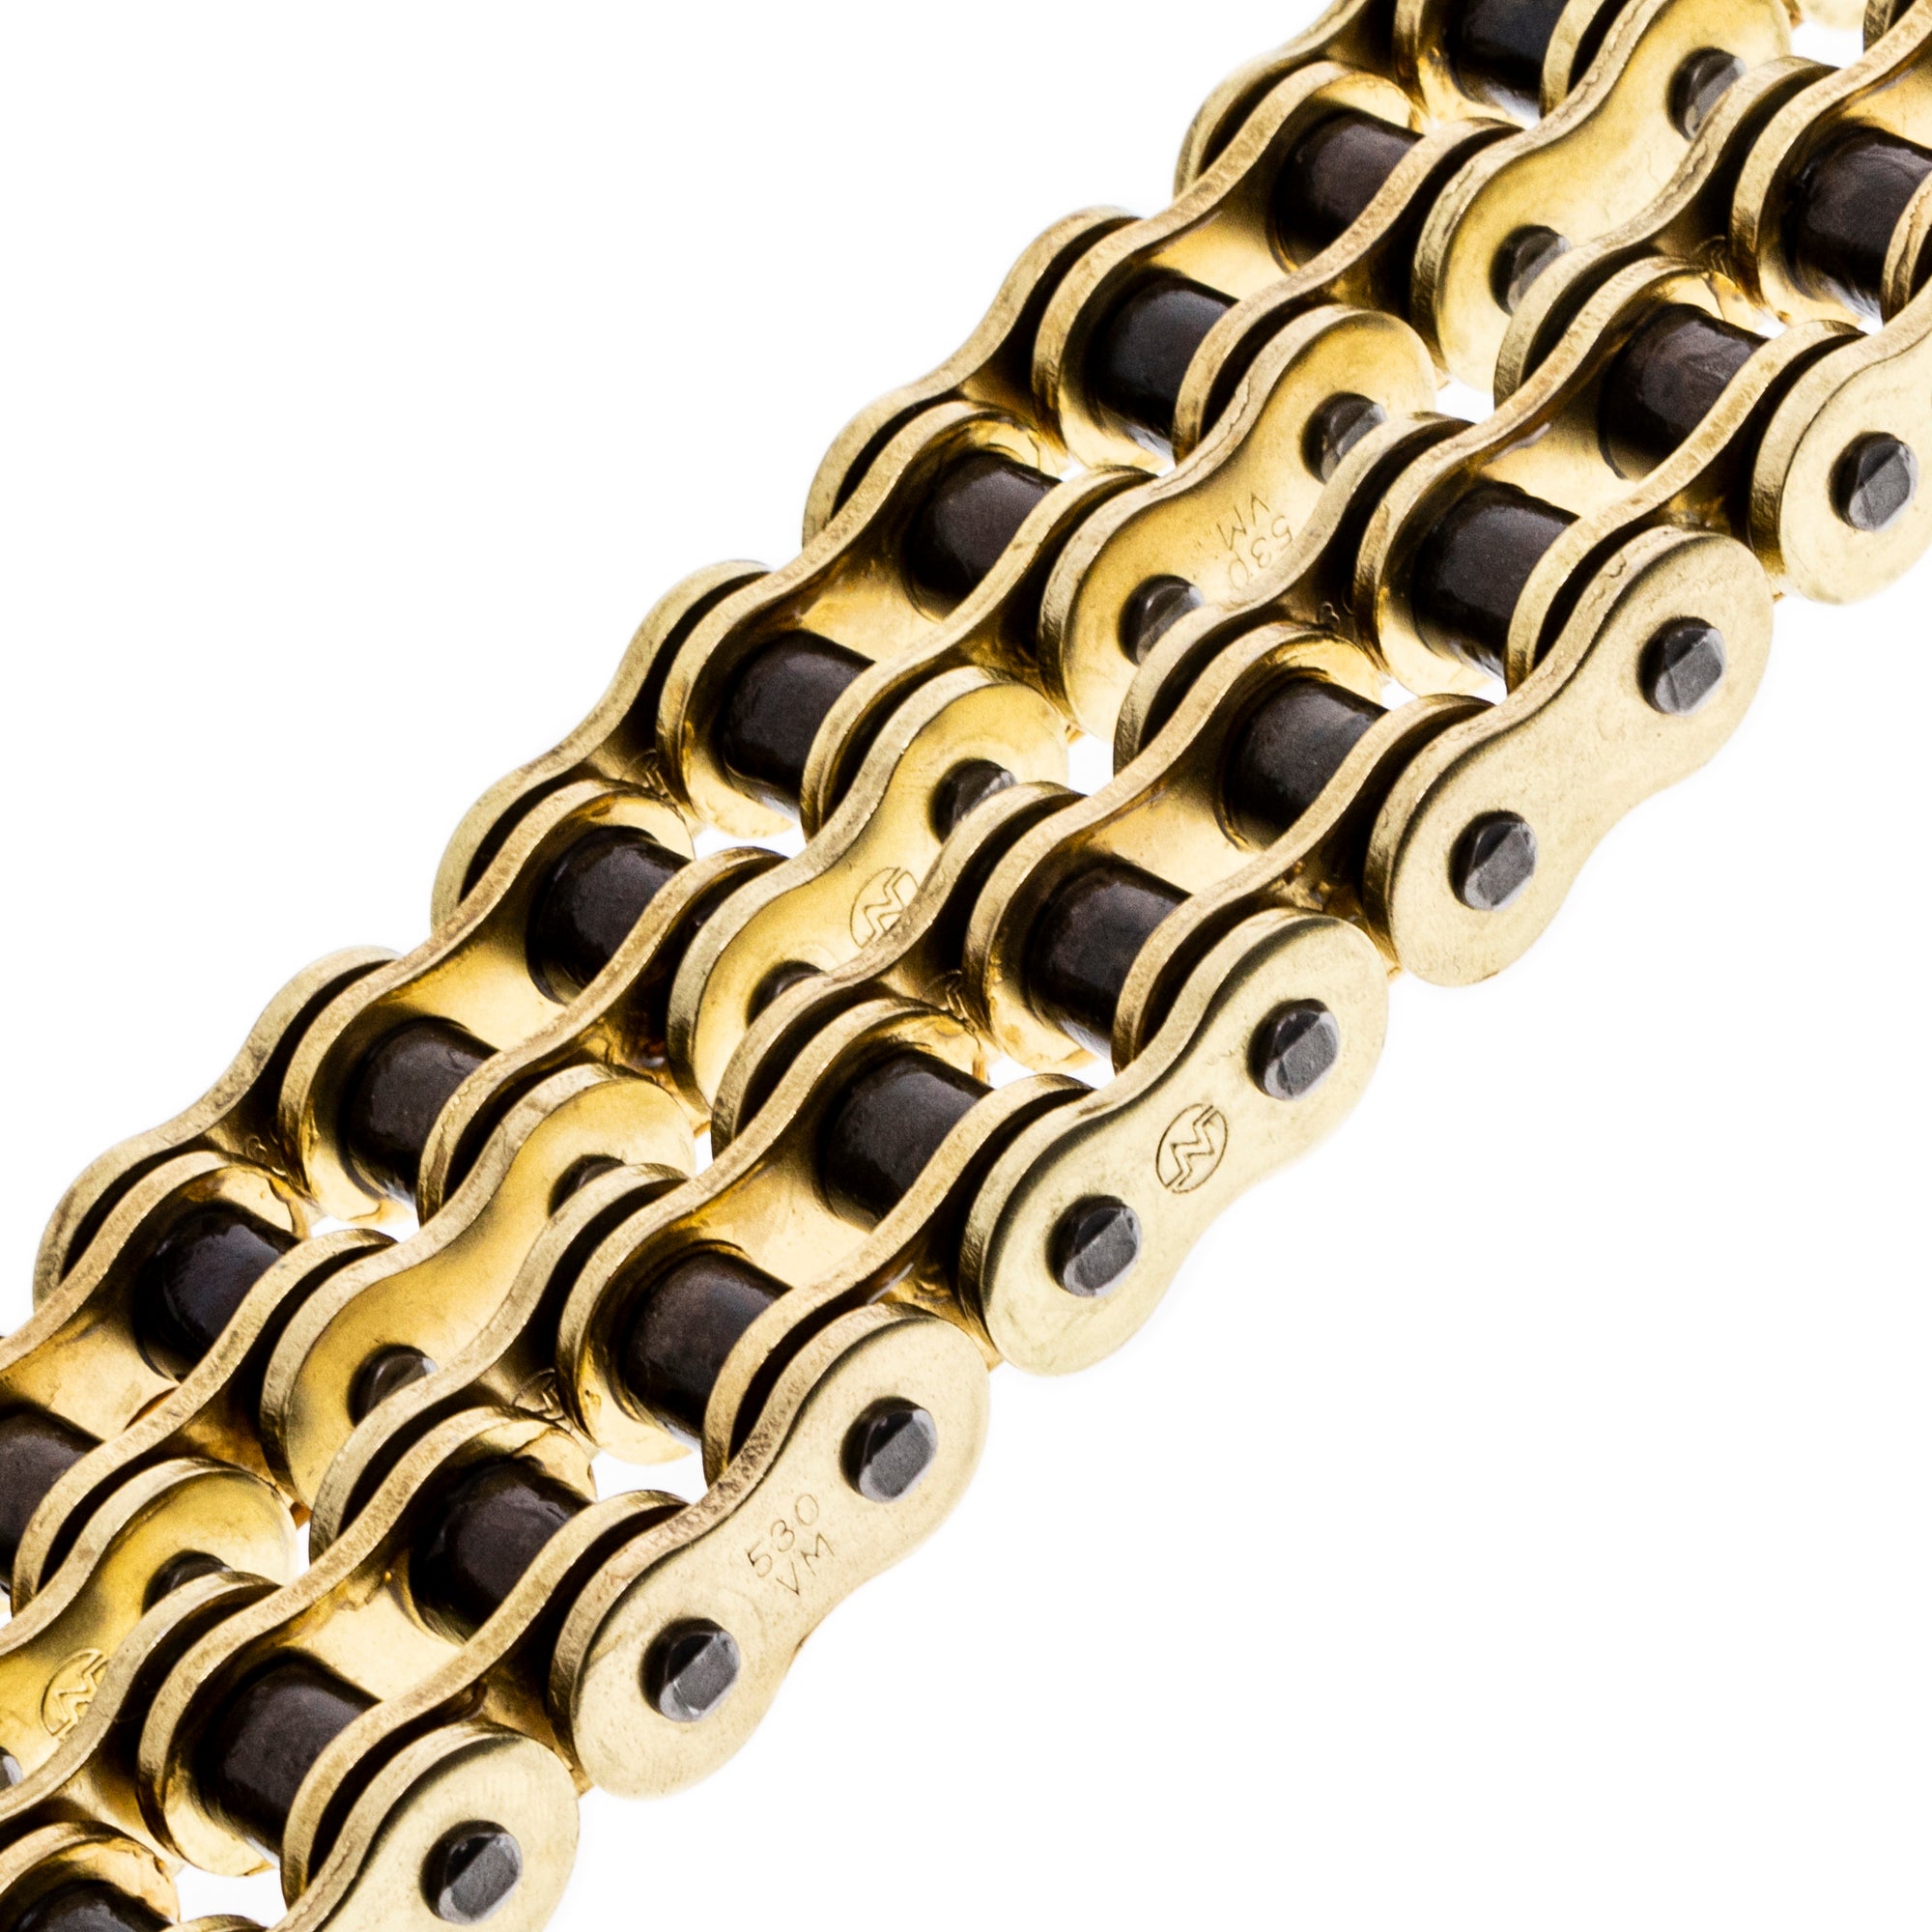 Gold X-Ring Chain 102 w/ Master Link for zOTHER XT500 XS400S XS400 XL350 94685-30011-00 NICHE 519-CDC2535H